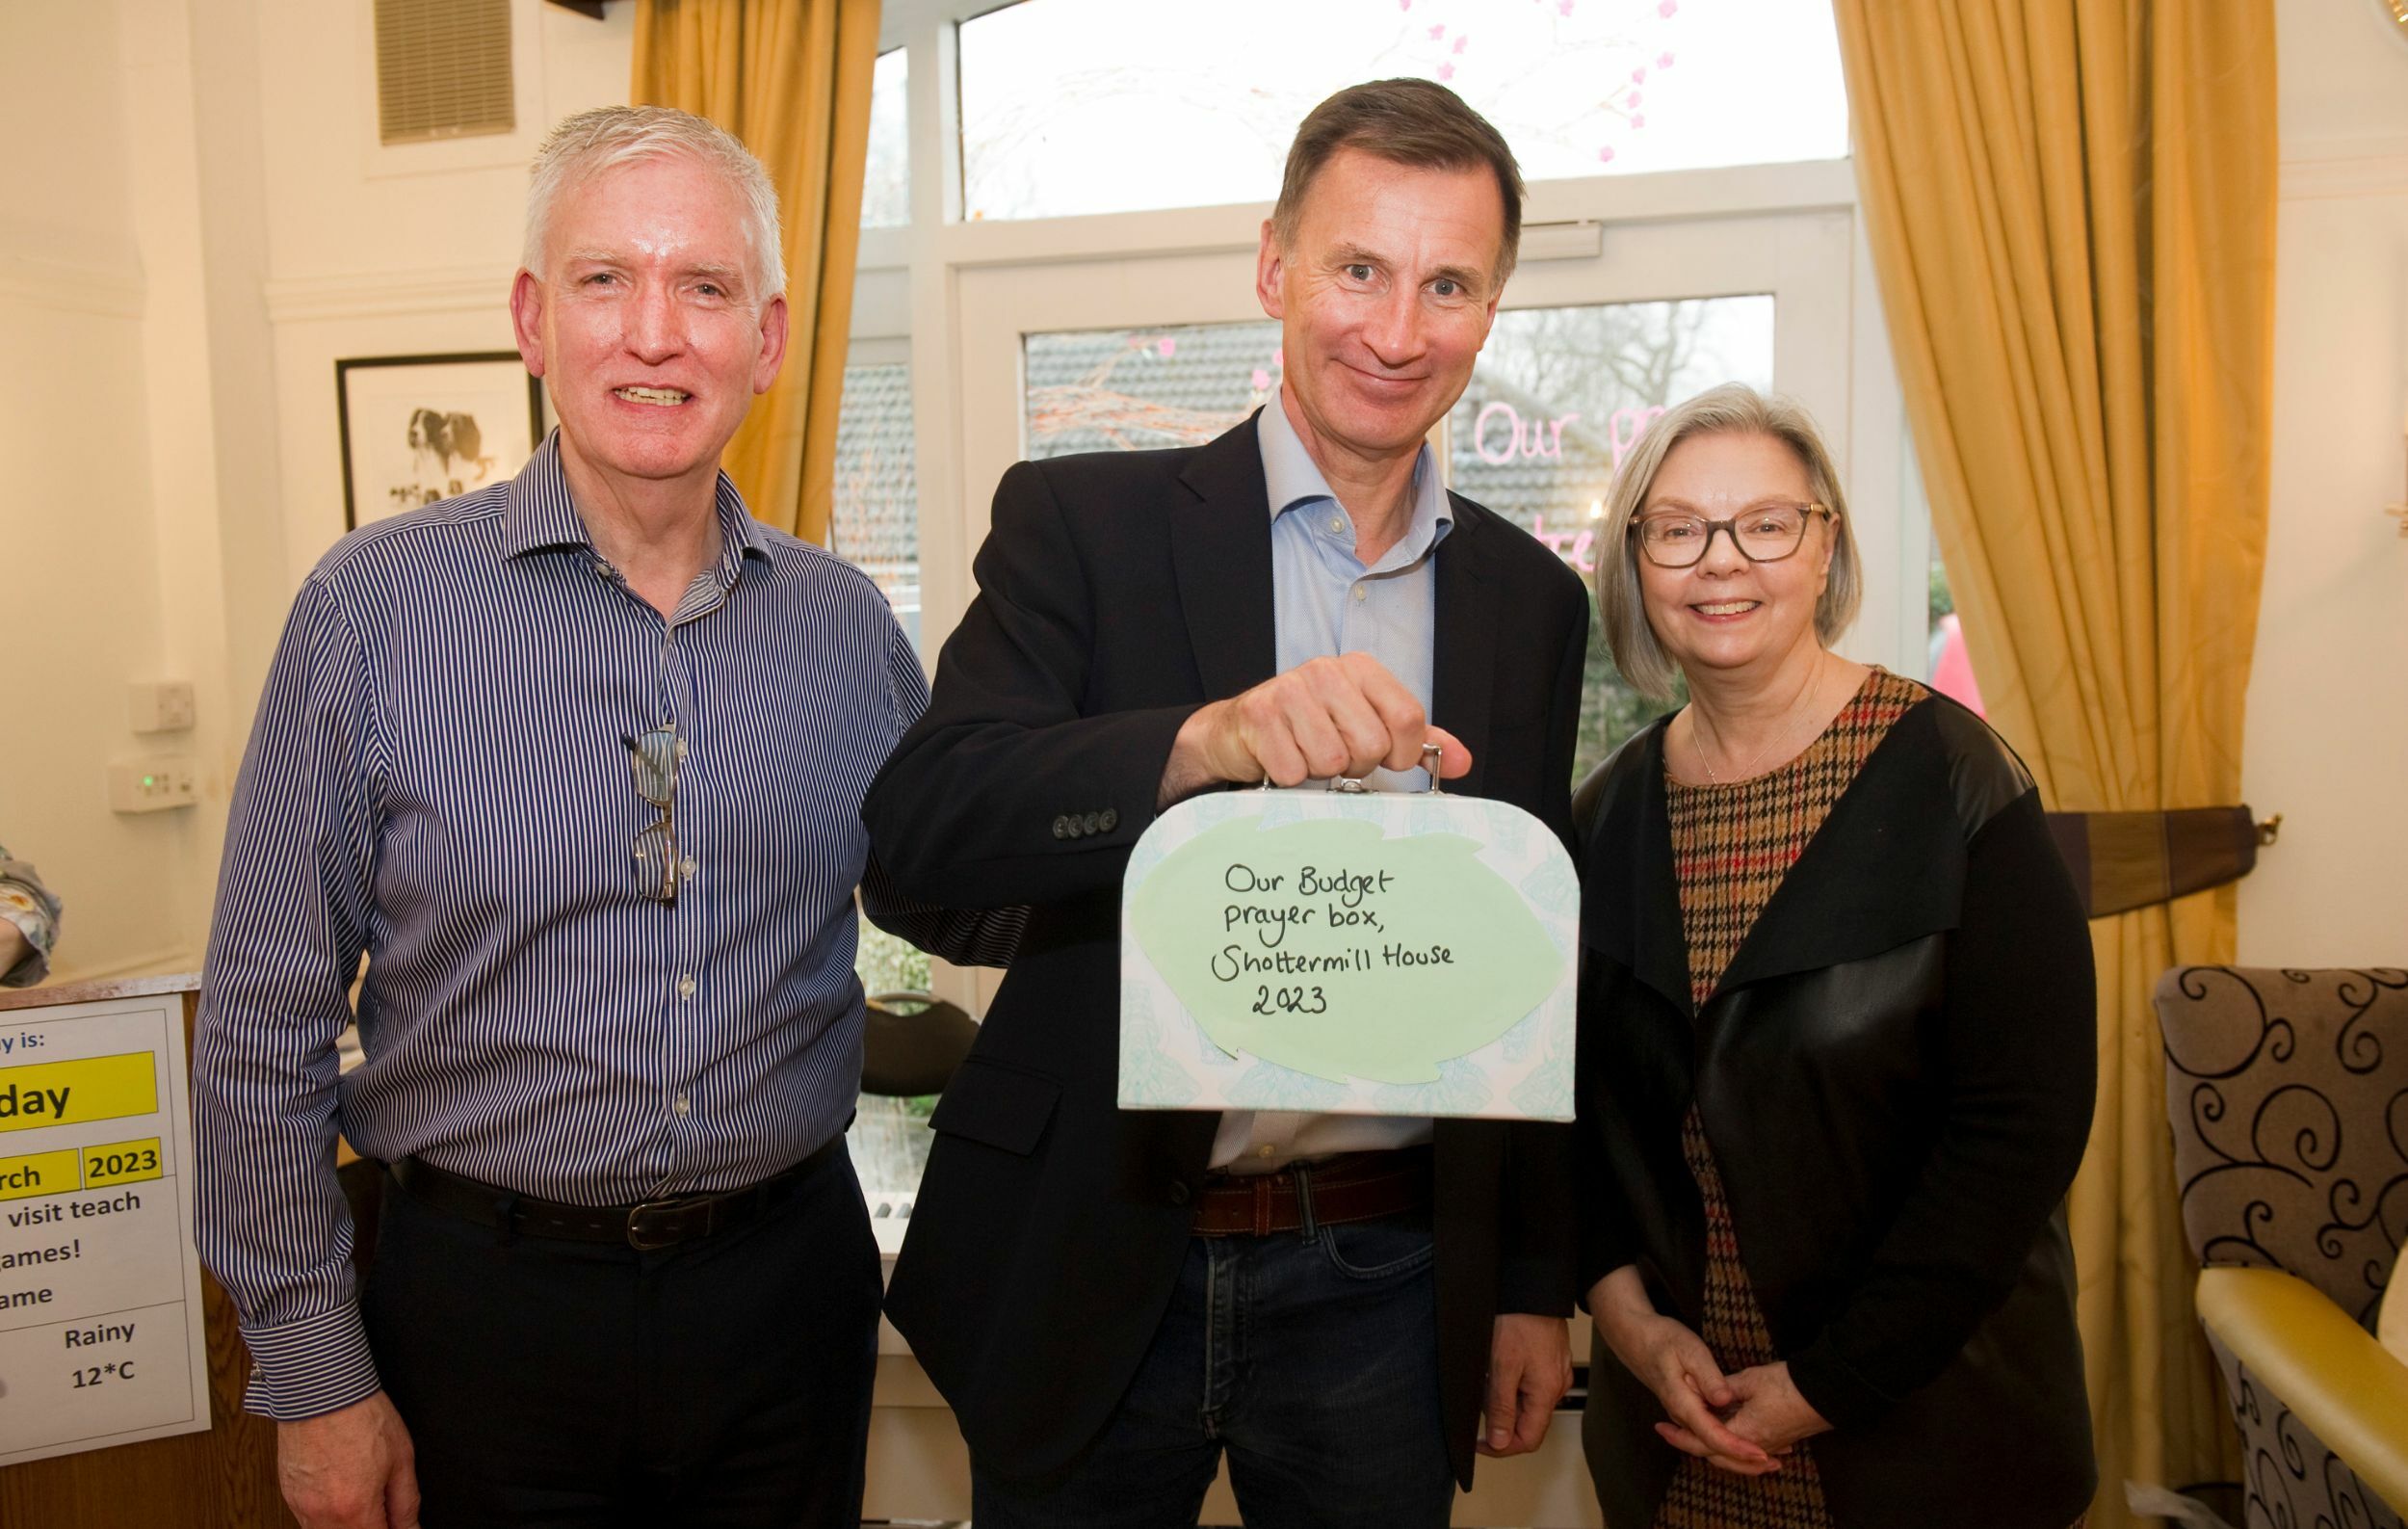 Jeremy Hunt receives Budget Prayer Box from Shottermill House